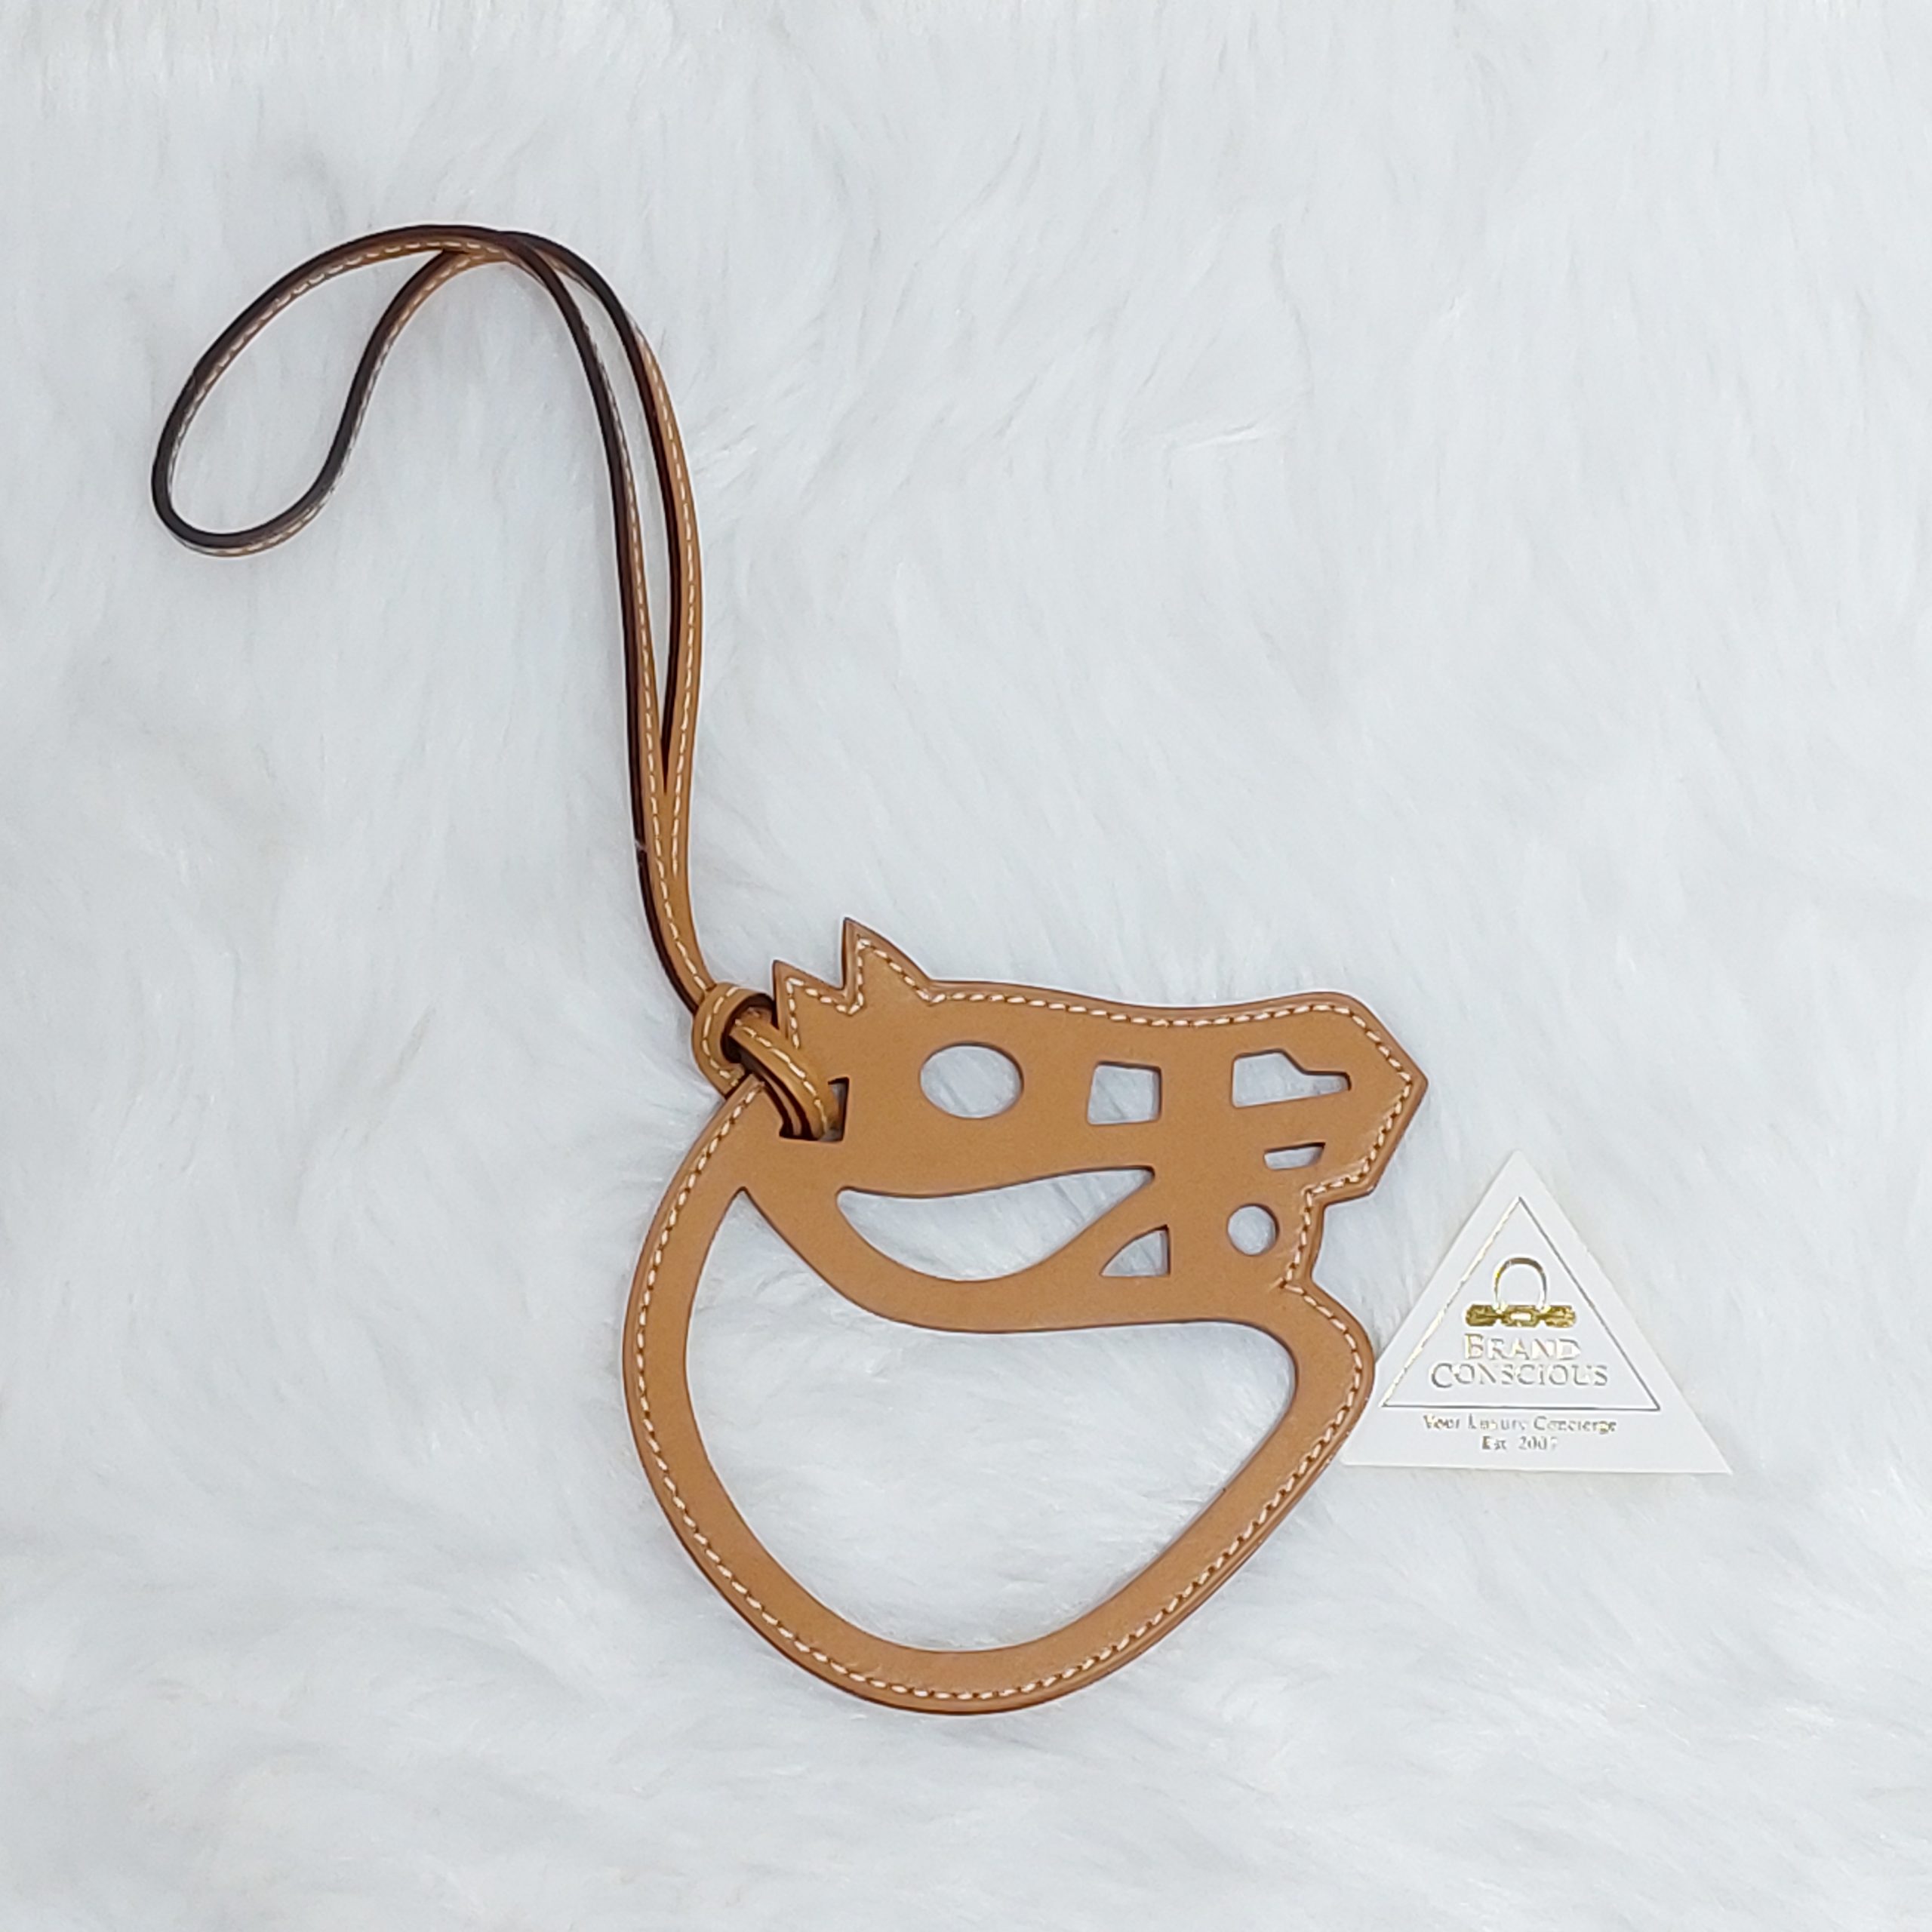 Hermes Horse Face Paddock Cheval Bag Charm Natural Sable - BrandConscious  Authentics